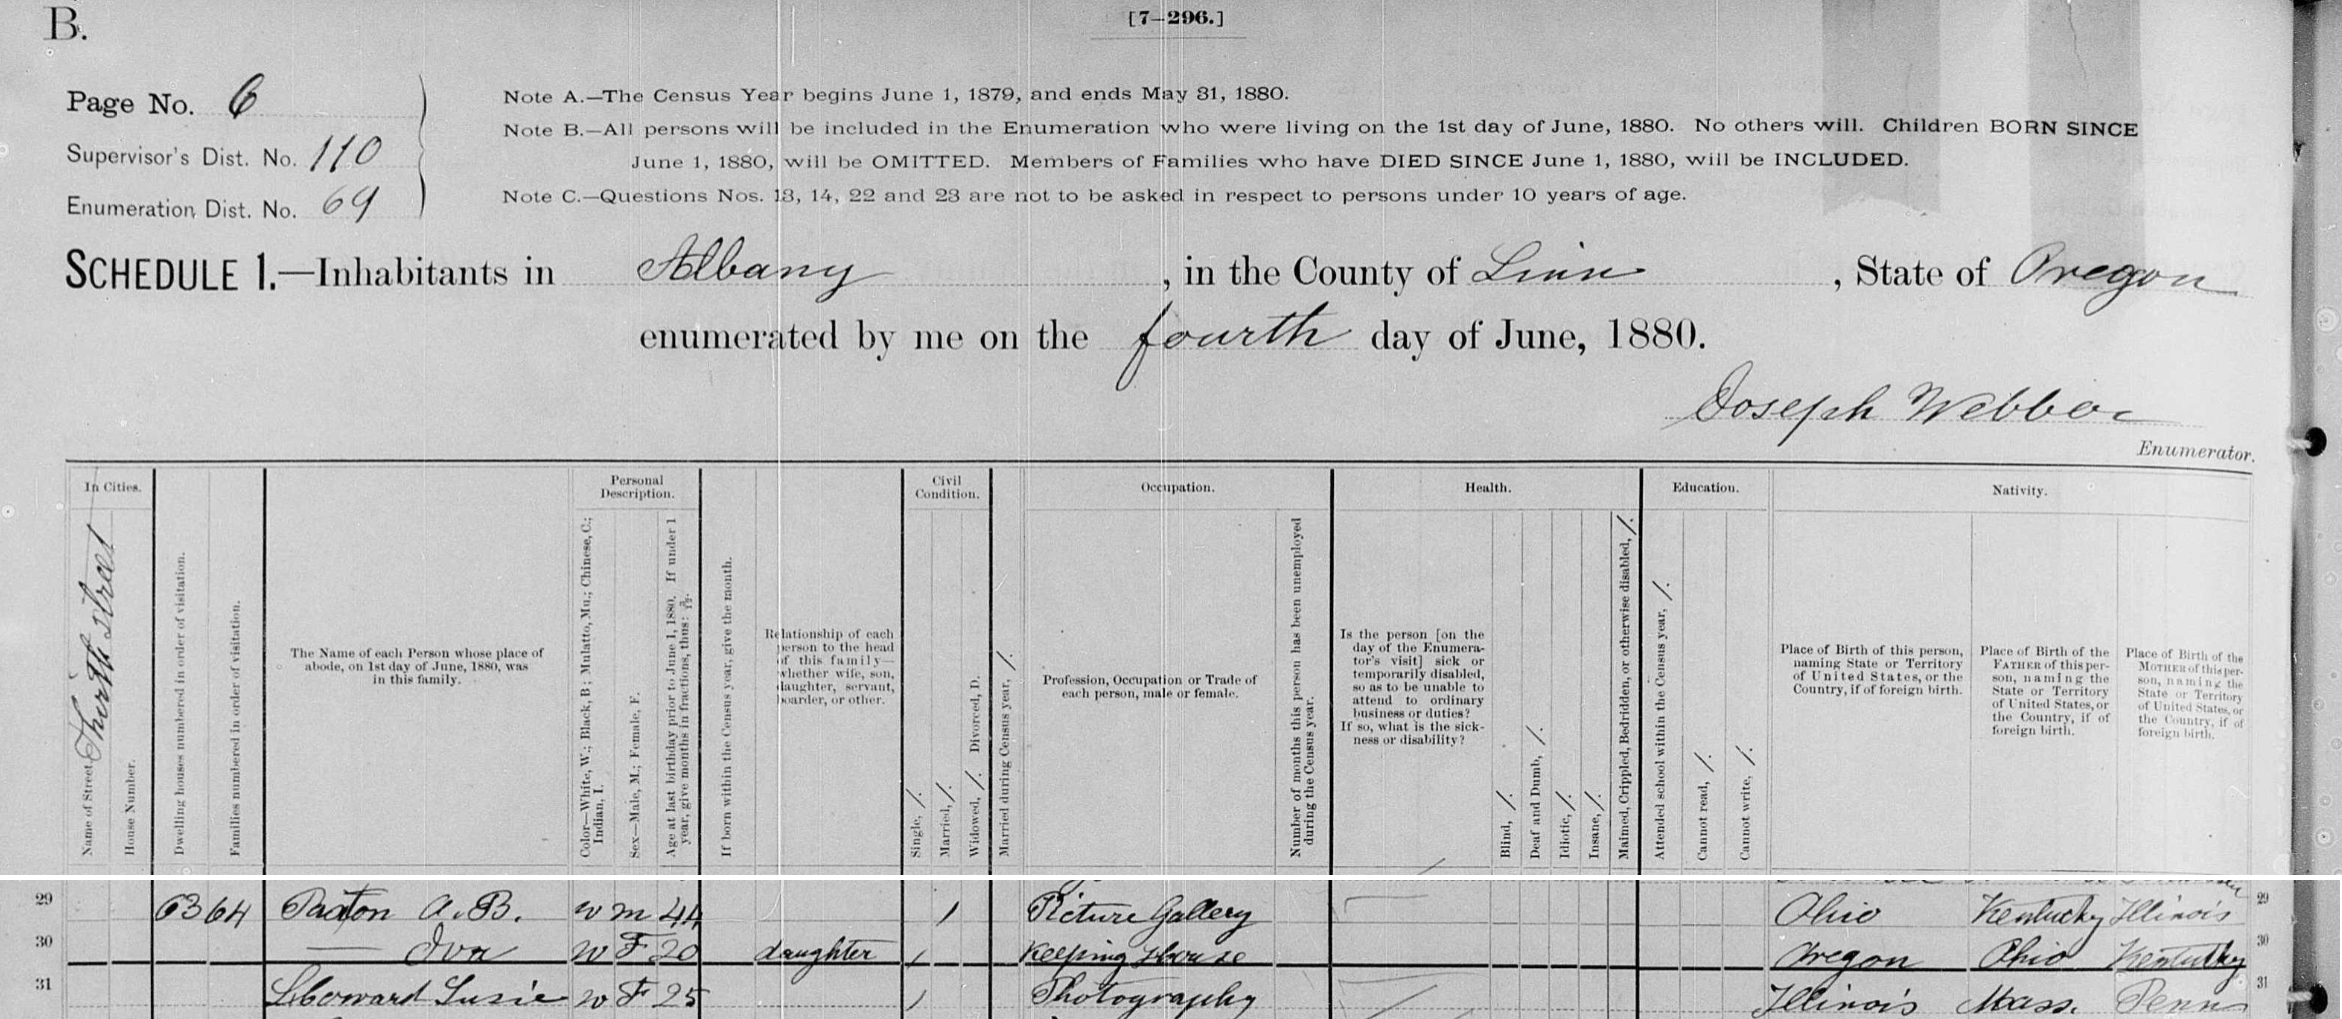 The 1880 Census listing for A.B. Paxton from Albany, Oregon shows him as age 44 and born in Ohio. His occupation is Picture Gallery.